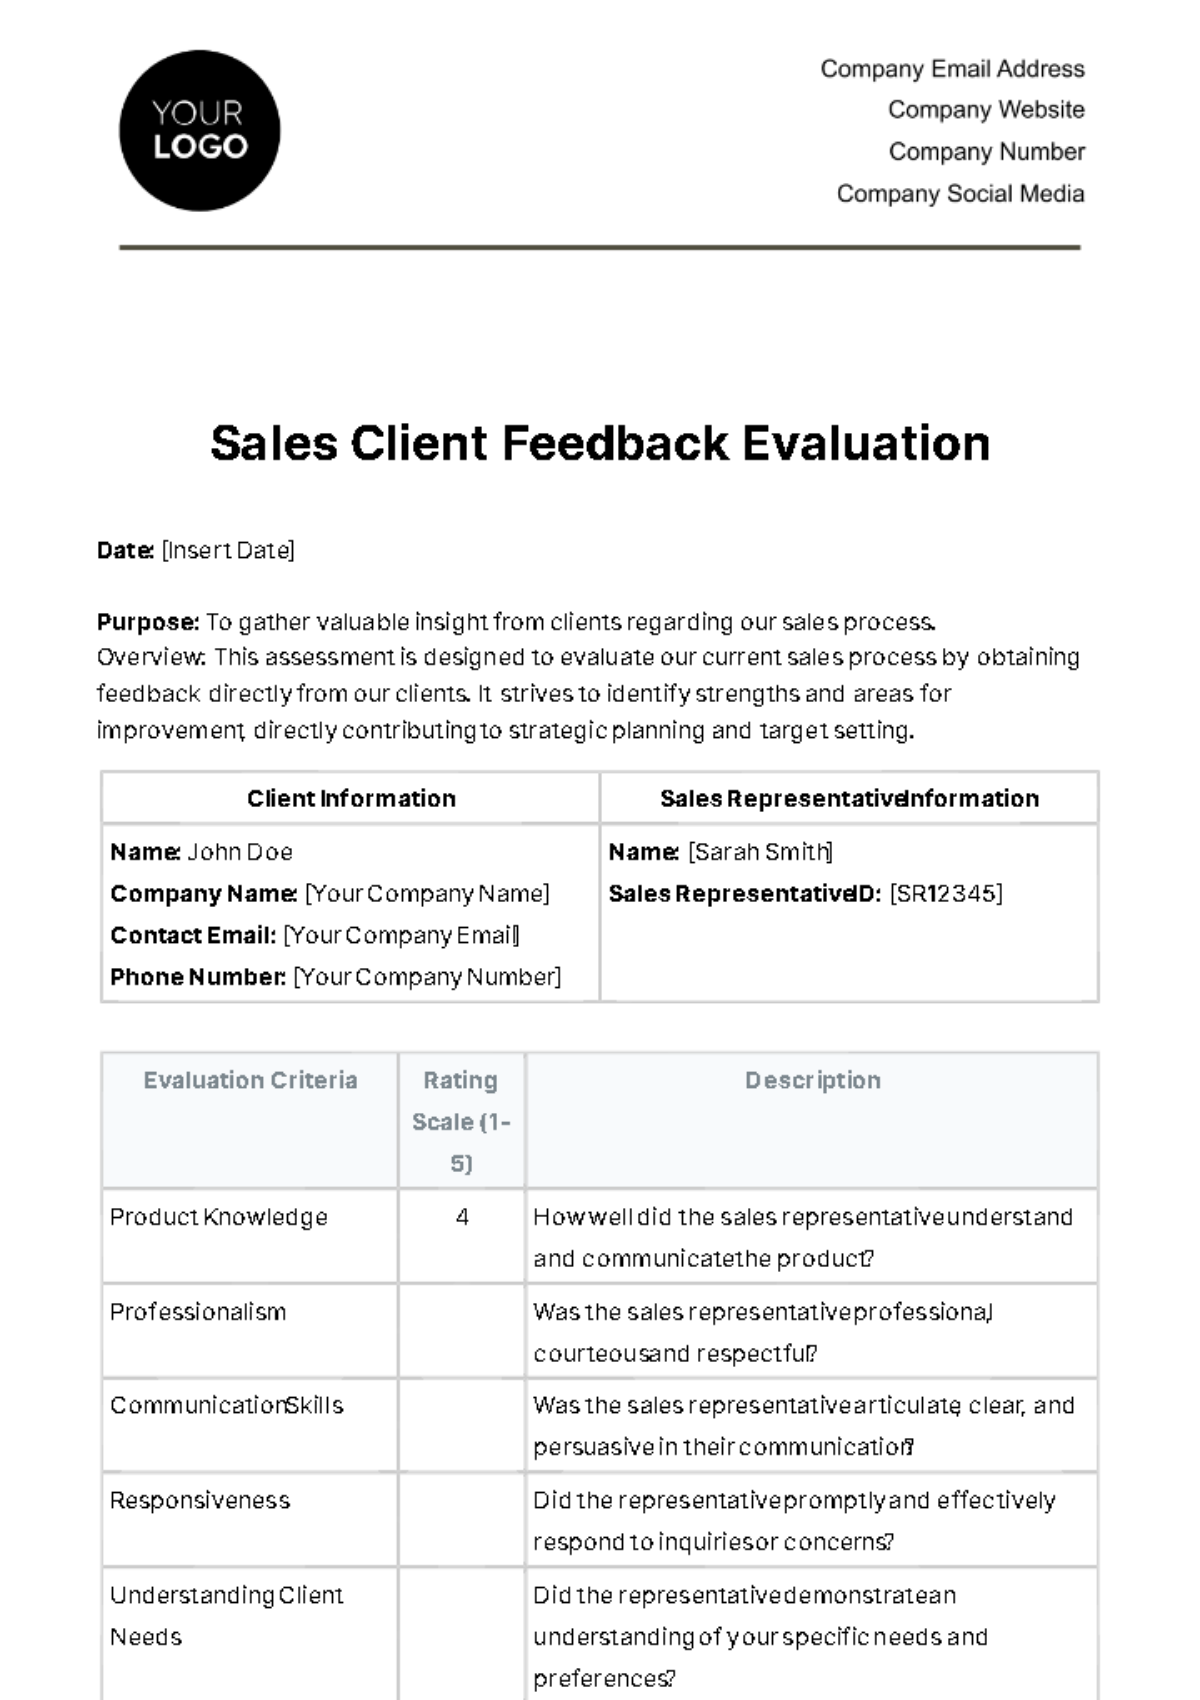 Free Sales Client Feedback Evaluation Template